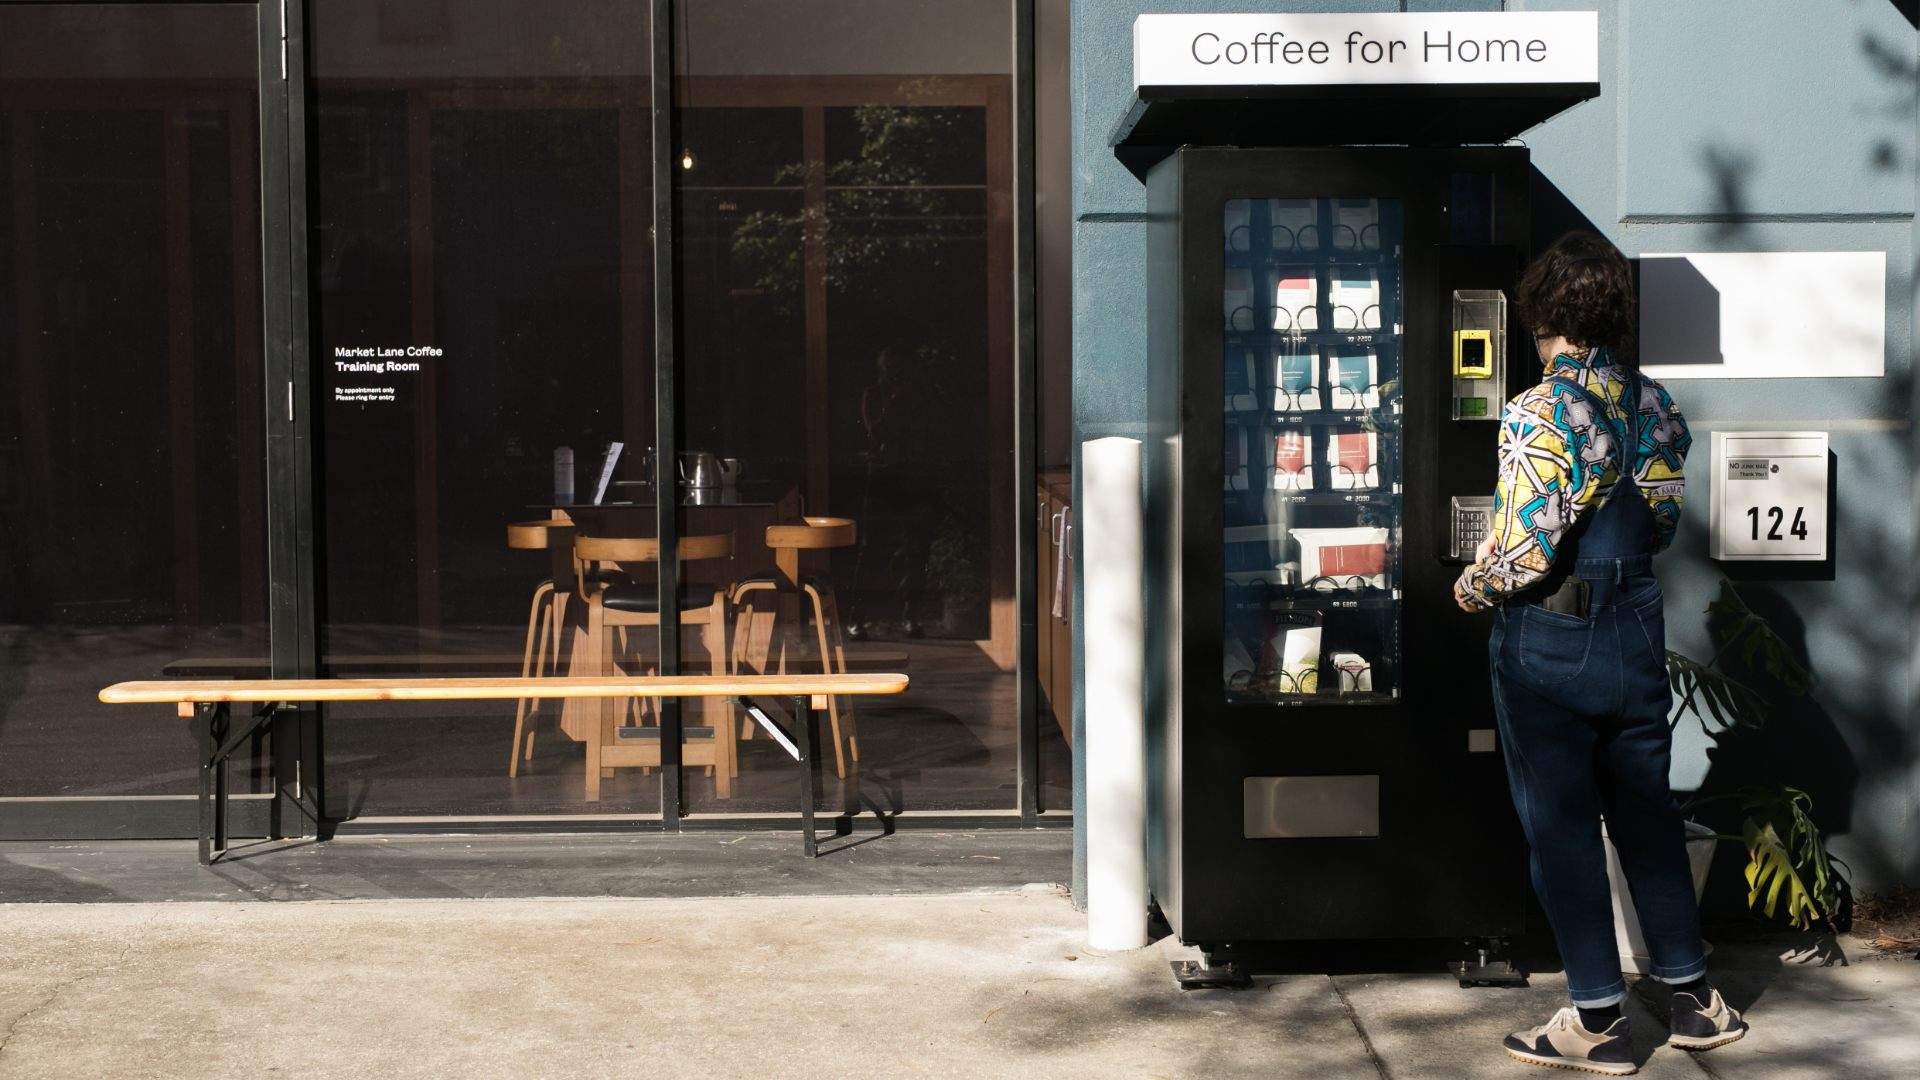 Brunswick East Is Now Home to a Market Lane Coffee Bean Vending Machine